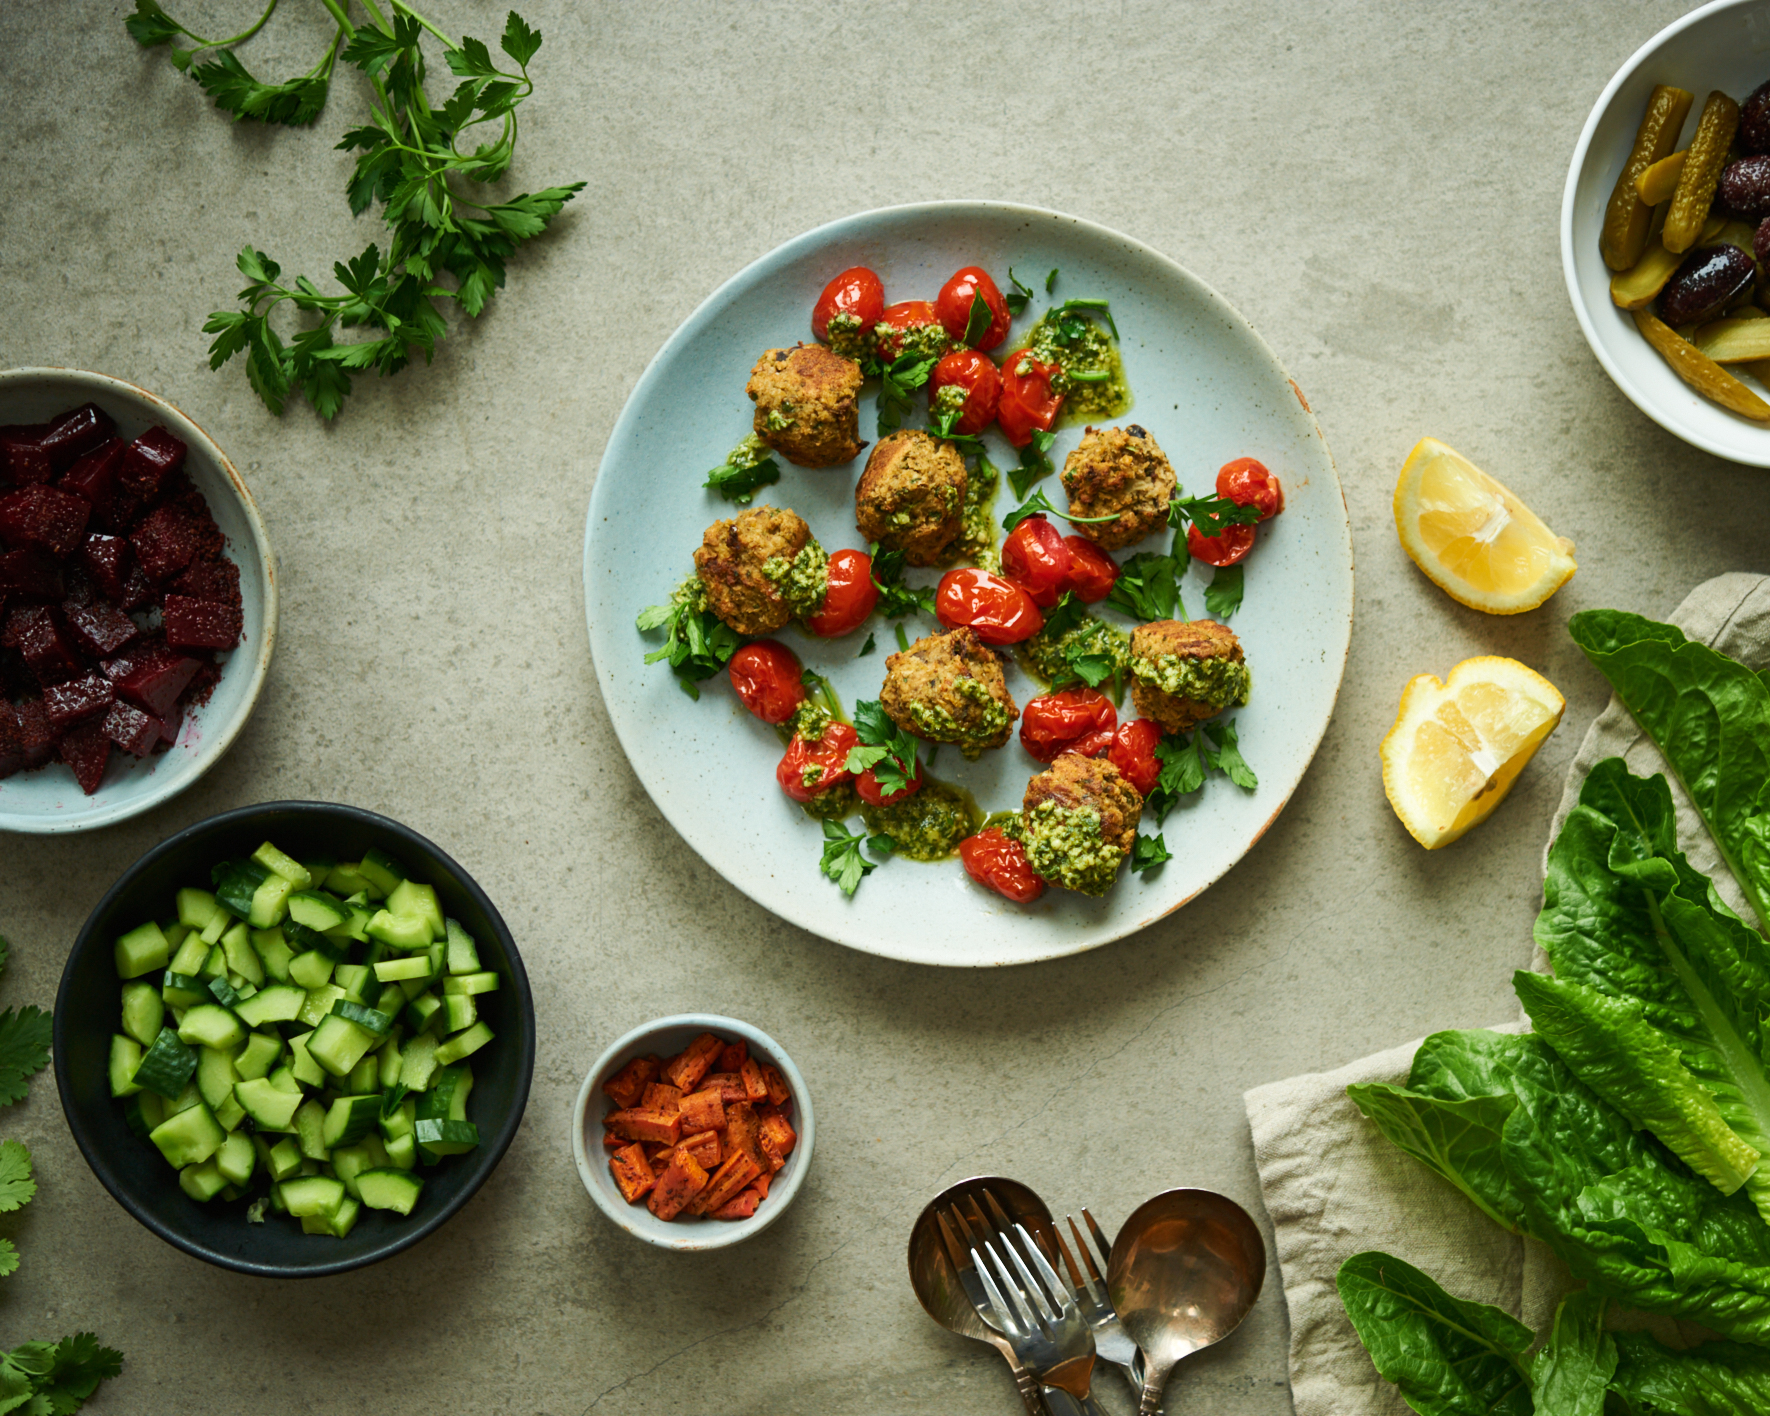 These eggplant meatballs are vegan and easy to make.